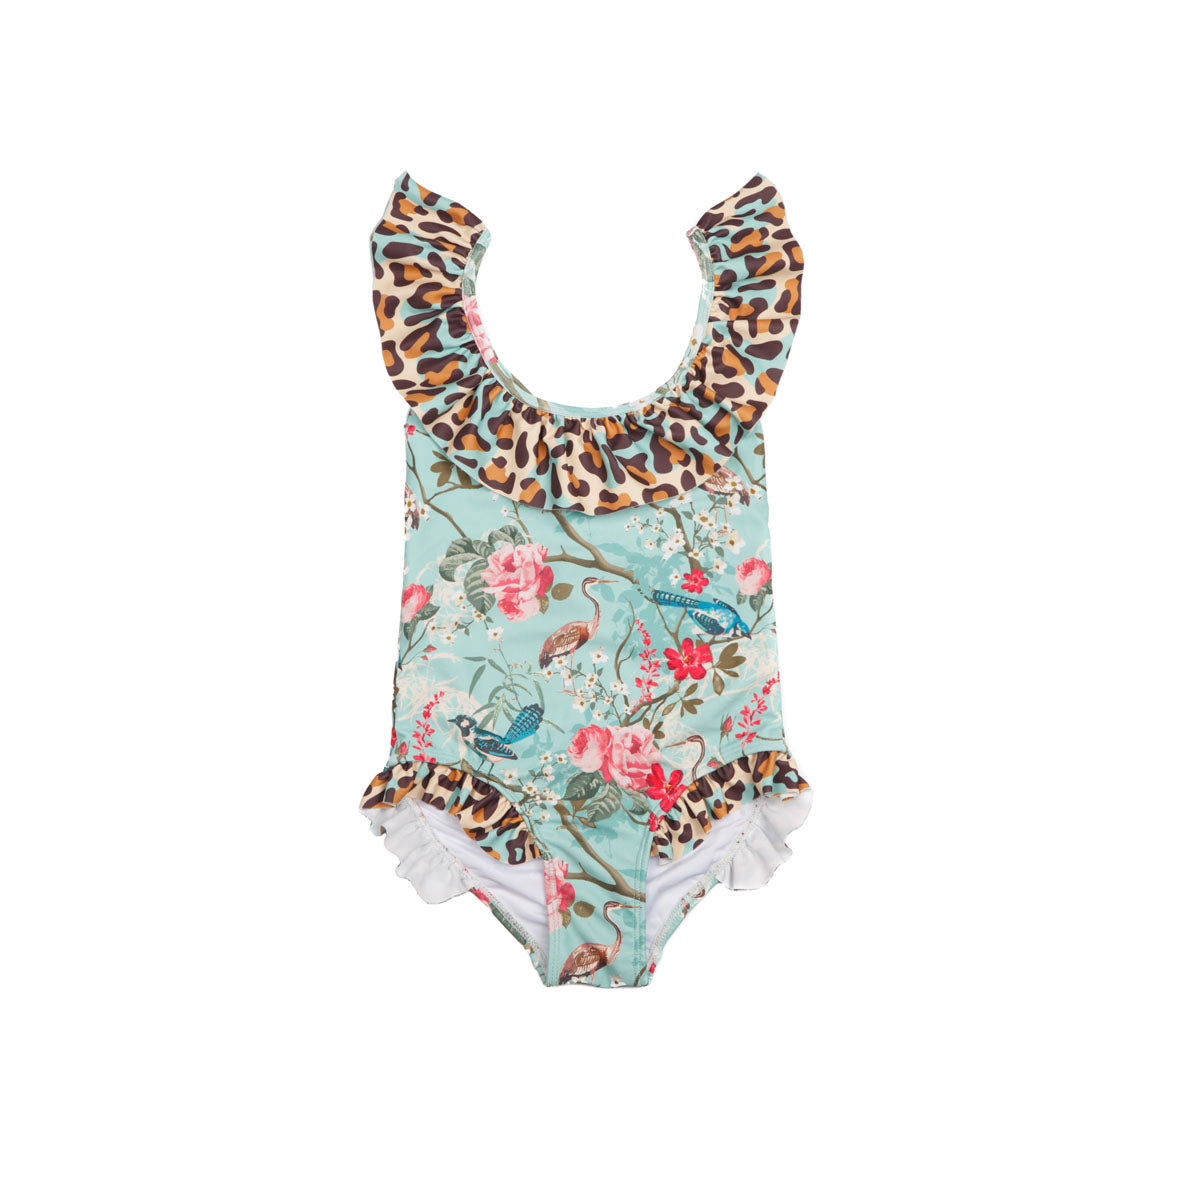 Girls Frilly Floral Bikini with High Waist - Front